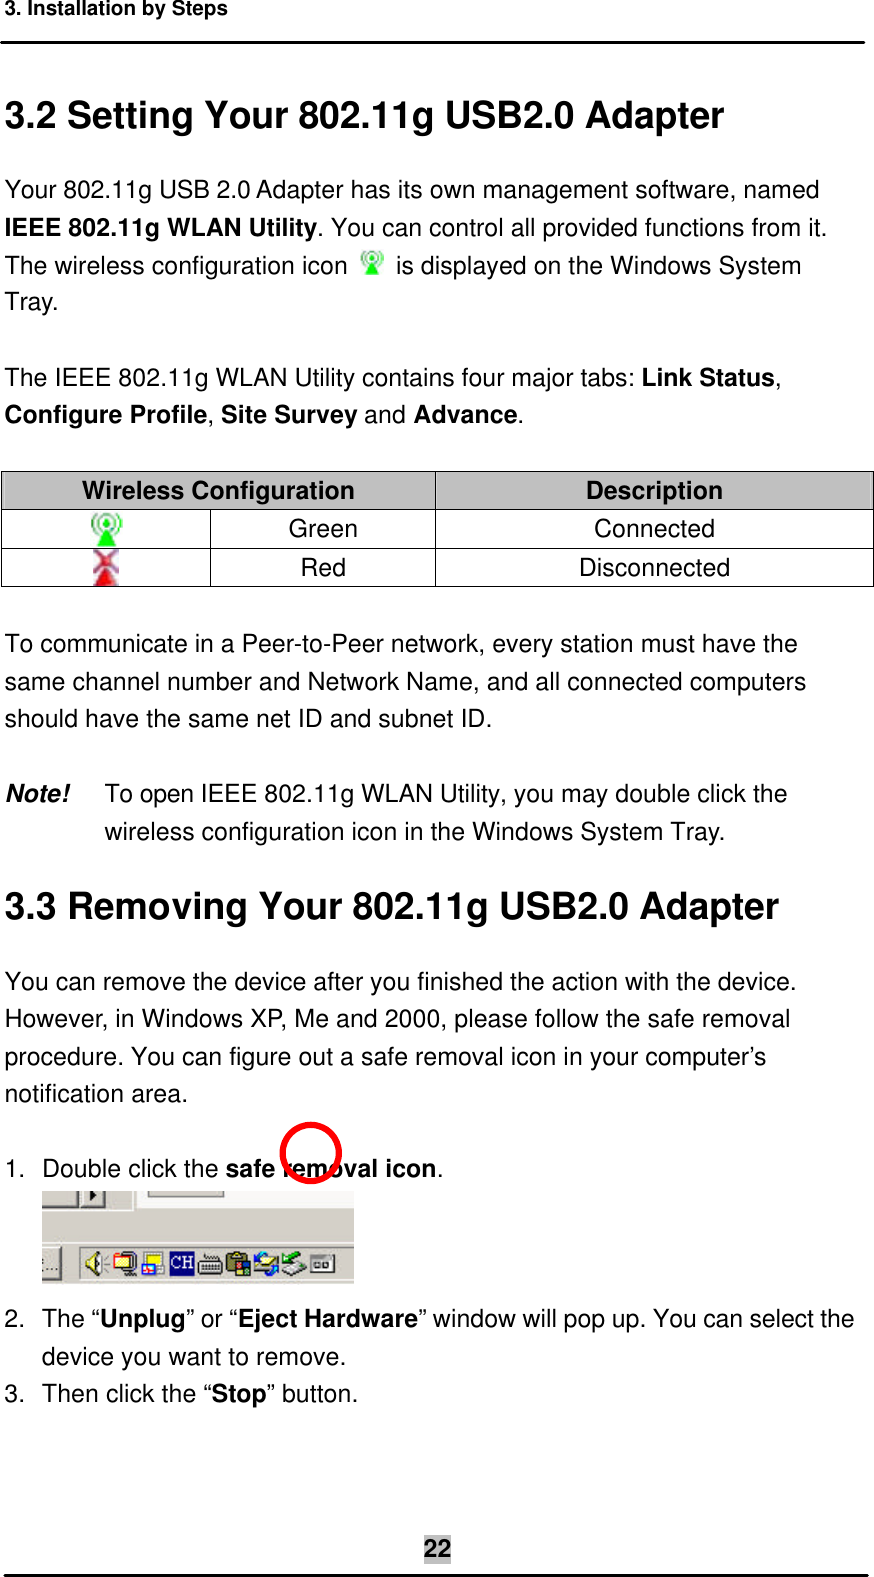 3. Installation by Steps  223.2 Setting Your 802.11g USB2.0 Adapter Your 802.11g USB 2.0 Adapter has its own management software, named IEEE 802.11g WLAN Utility. You can control all provided functions from it. The wireless configuration icon   is displayed on the Windows System Tray.  The IEEE 802.11g WLAN Utility contains four major tabs: Link Status, Configure Profile, Site Survey and Advance.  Wireless Configuration Description  Green Connected  Red Disconnected  To communicate in a Peer-to-Peer network, every station must have the same channel number and Network Name, and all connected computers should have the same net ID and subnet ID.  Note! To open IEEE 802.11g WLAN Utility, you may double click the wireless configuration icon in the Windows System Tray. 3.3 Removing Your 802.11g USB2.0 Adapter You can remove the device after you finished the action with the device. However, in Windows XP, Me and 2000, please follow the safe removal procedure. You can figure out a safe removal icon in your computer’s notification area.  1. Double click the safe removal icon.   2. The “Unplug” or “Eject Hardware” window will pop up. You can select the device you want to remove. 3. Then click the “Stop” button. 